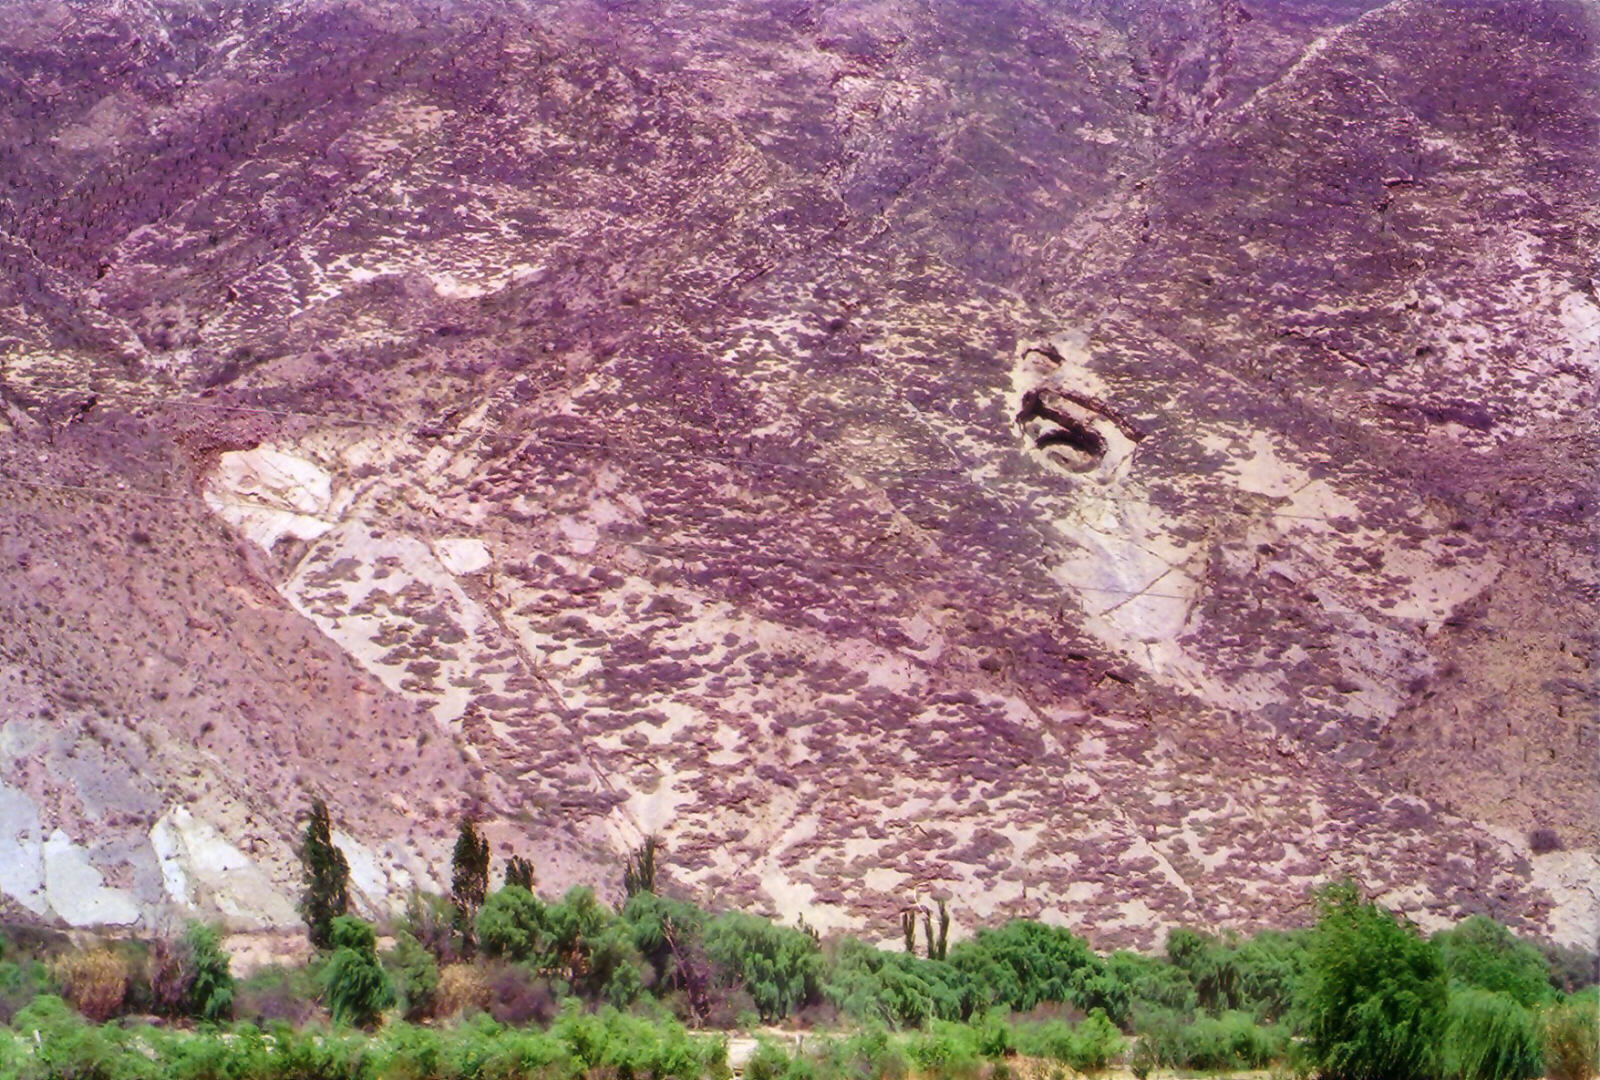 Apparently a meteor crater in Humahuaca Canyon, Argentina